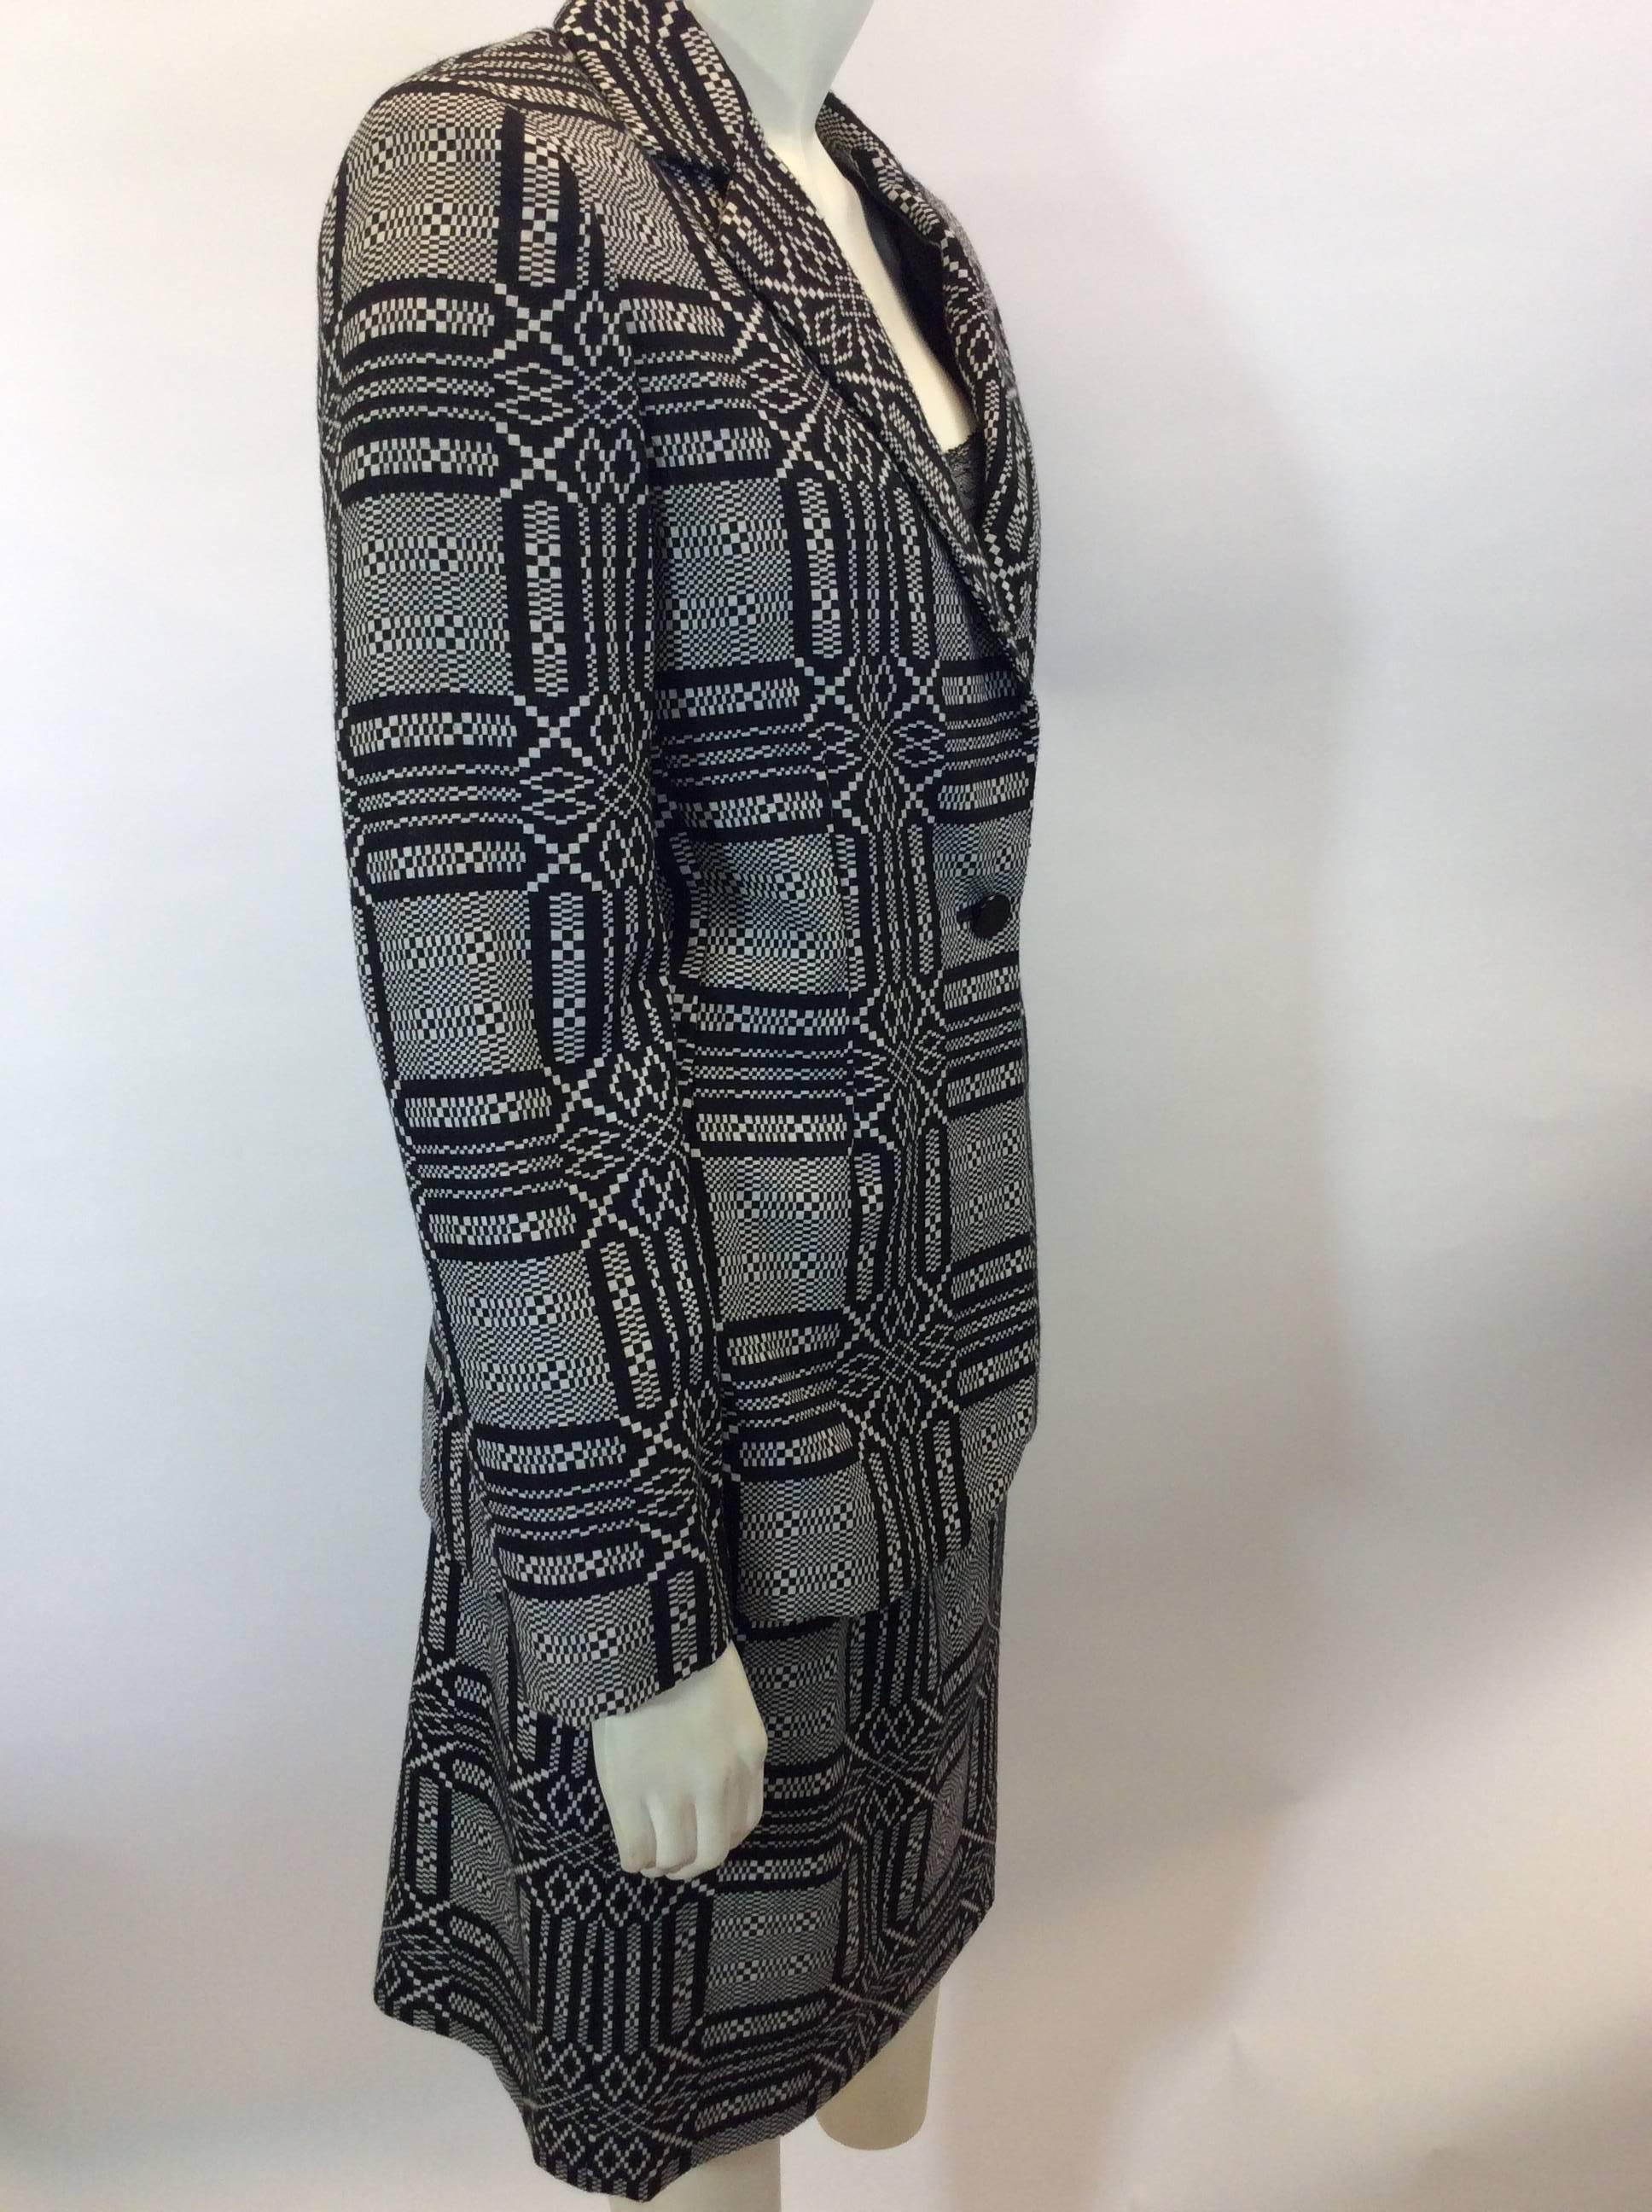 Bill Blass Printed Skirt Suit In Excellent Condition For Sale In Narberth, PA